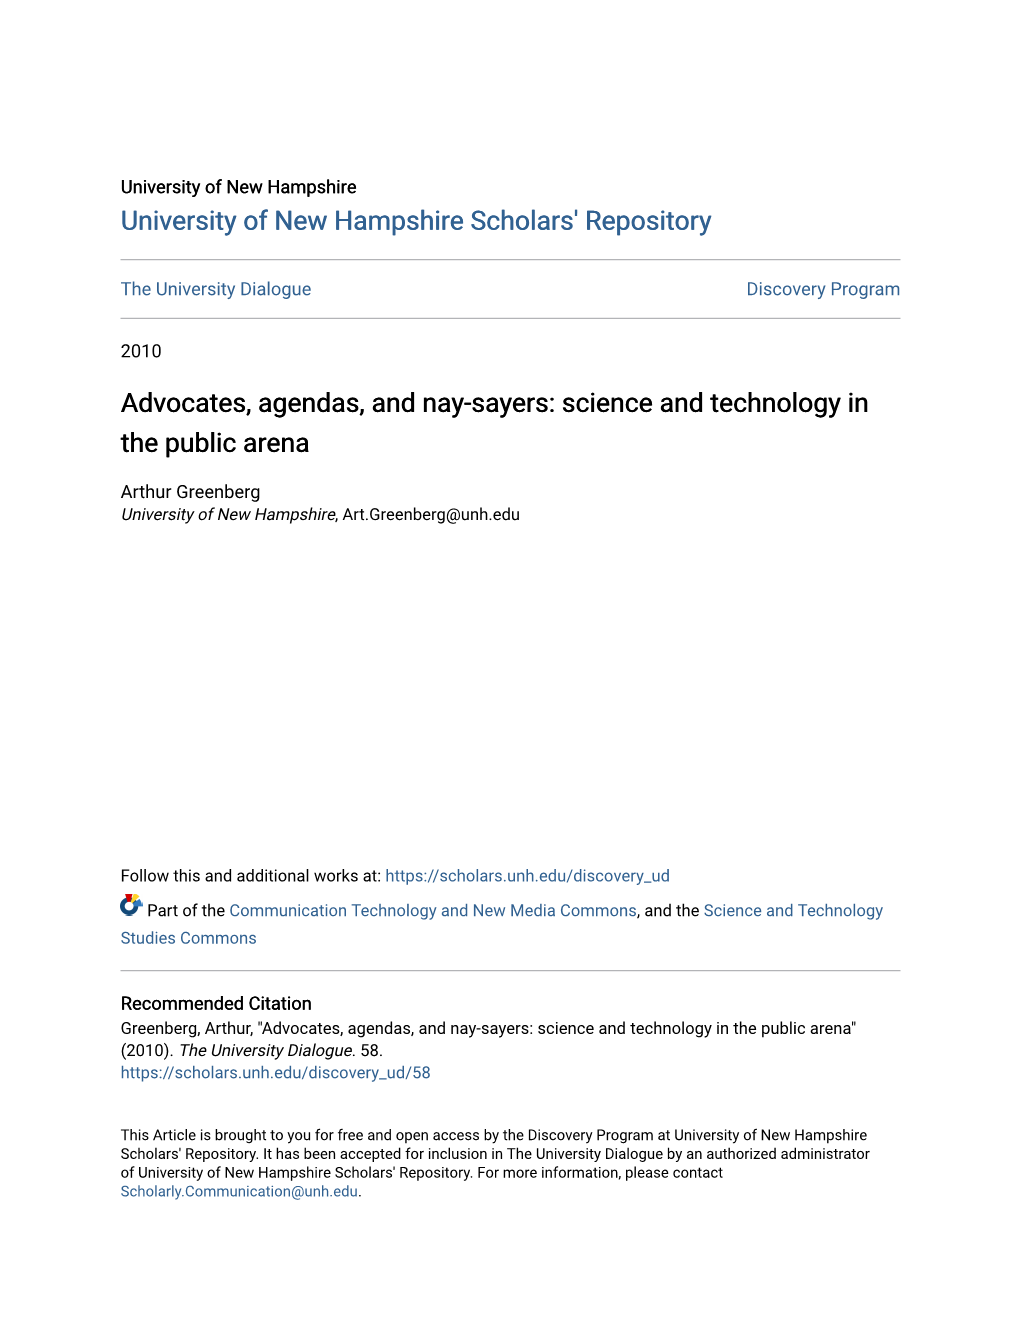 Advocates, Agendas, and Nay-Sayers: Science and Technology in the Public Arena